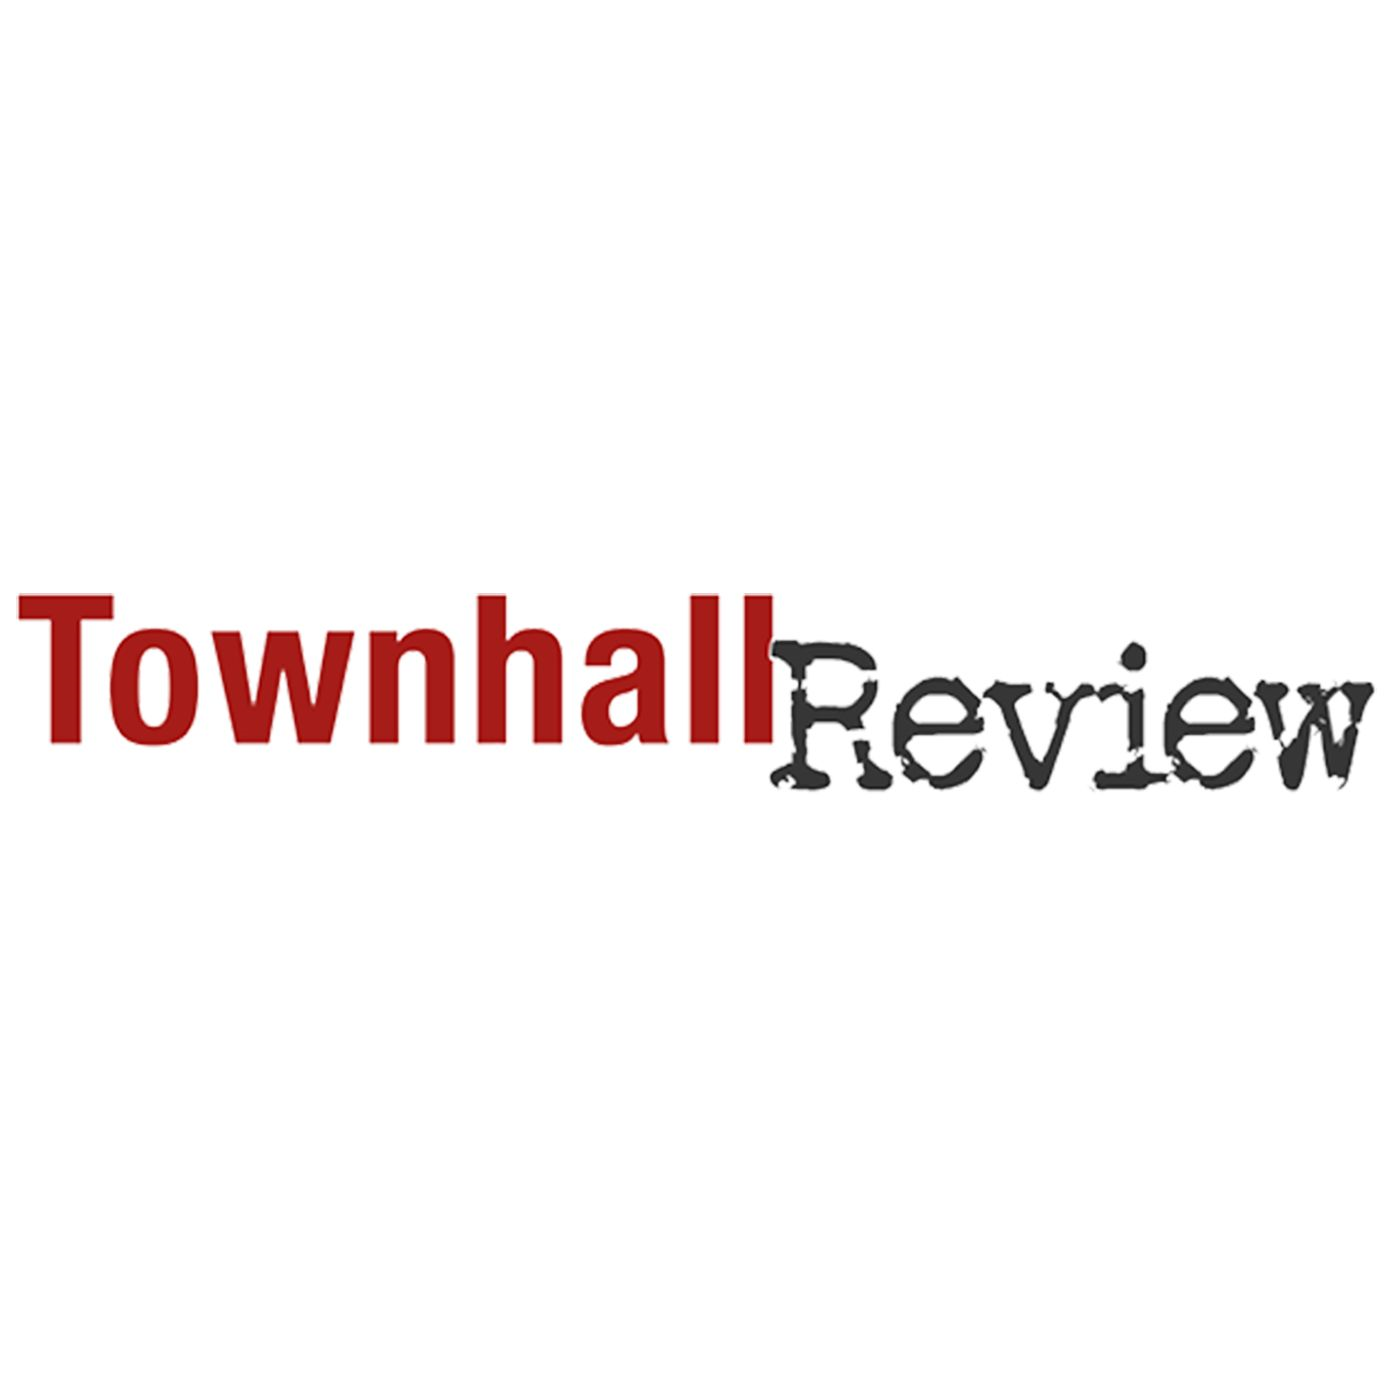 Townhall Review 10/10/15: Has Putin Bitten Off More Than He Can Chew?